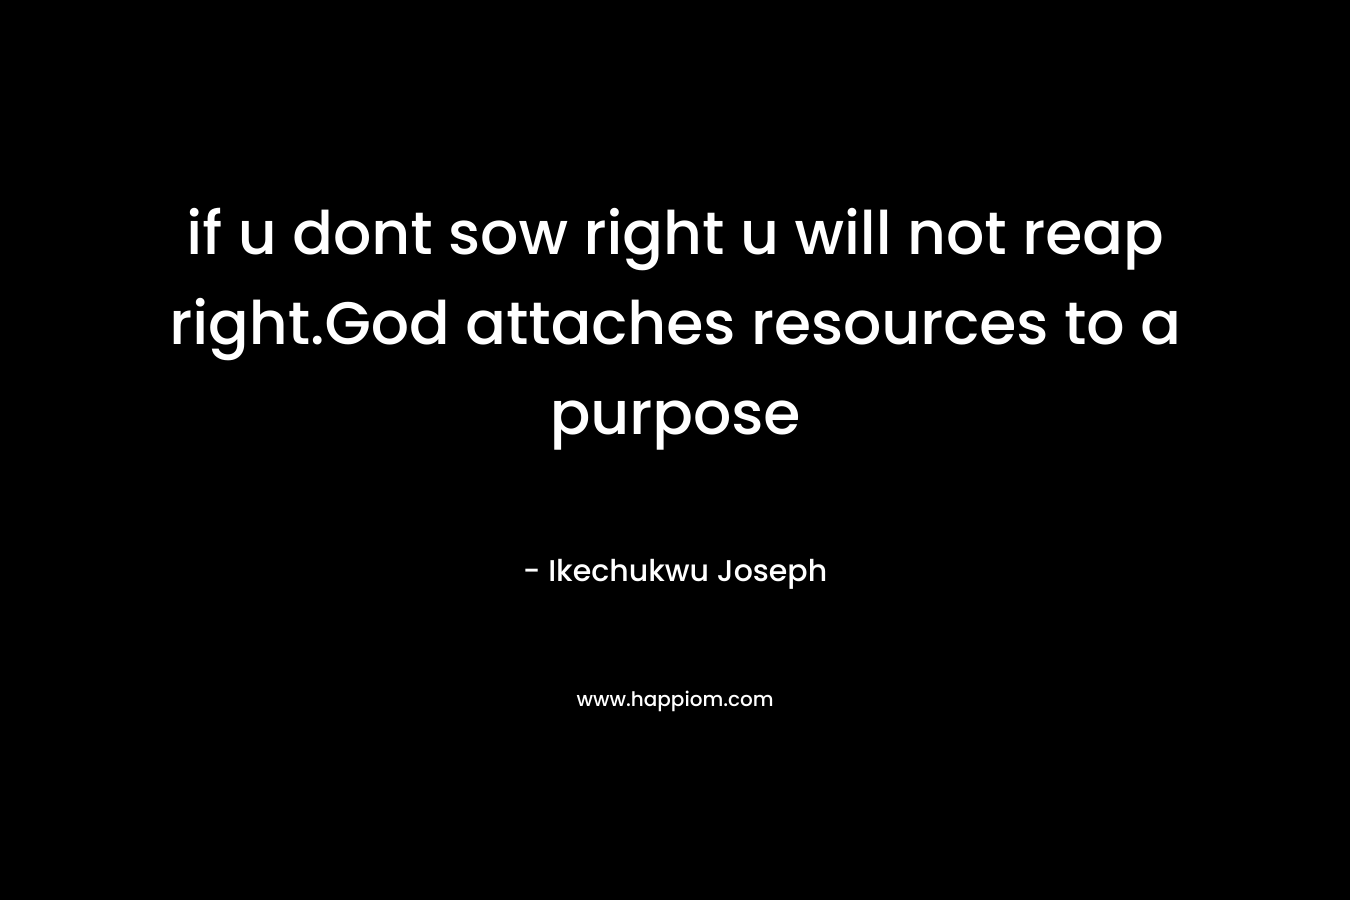 if u dont sow right u will not reap right.God attaches resources to a purpose